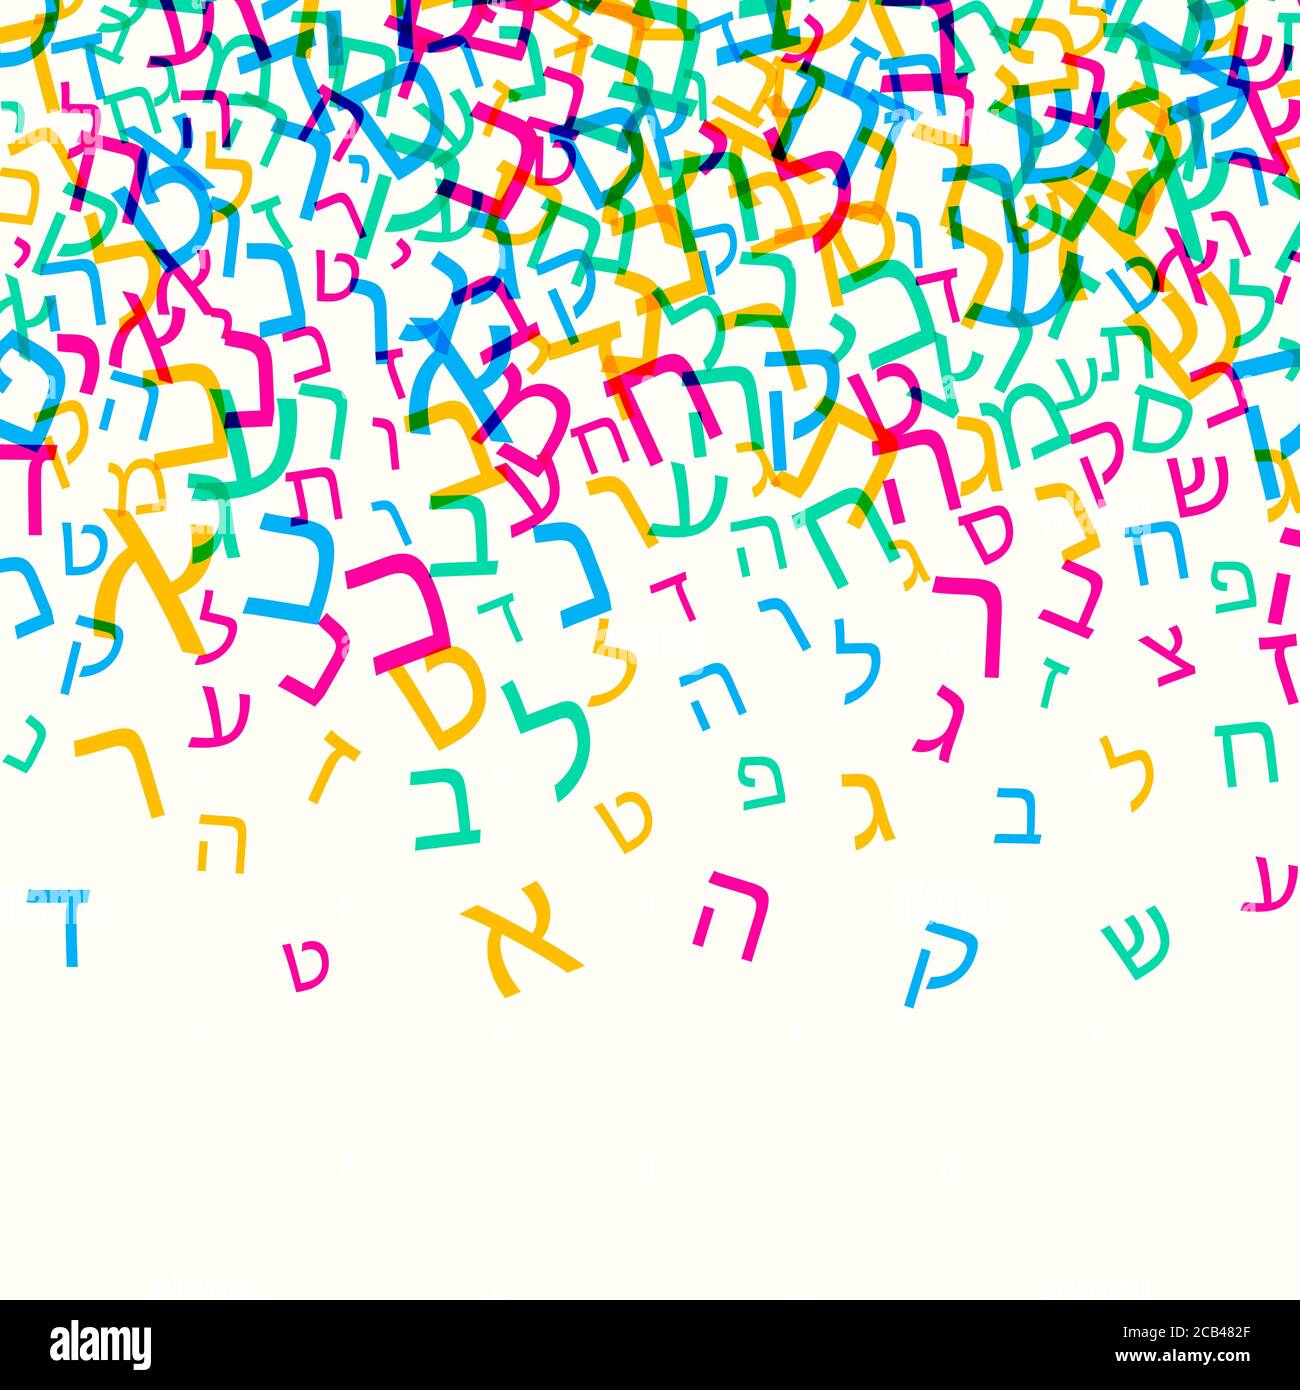 All letters of Hebrew alphabet, Jewish ABC background. Hebrew letters wordcloud. Vector illustration. Rainbow colored text. Stock Vector